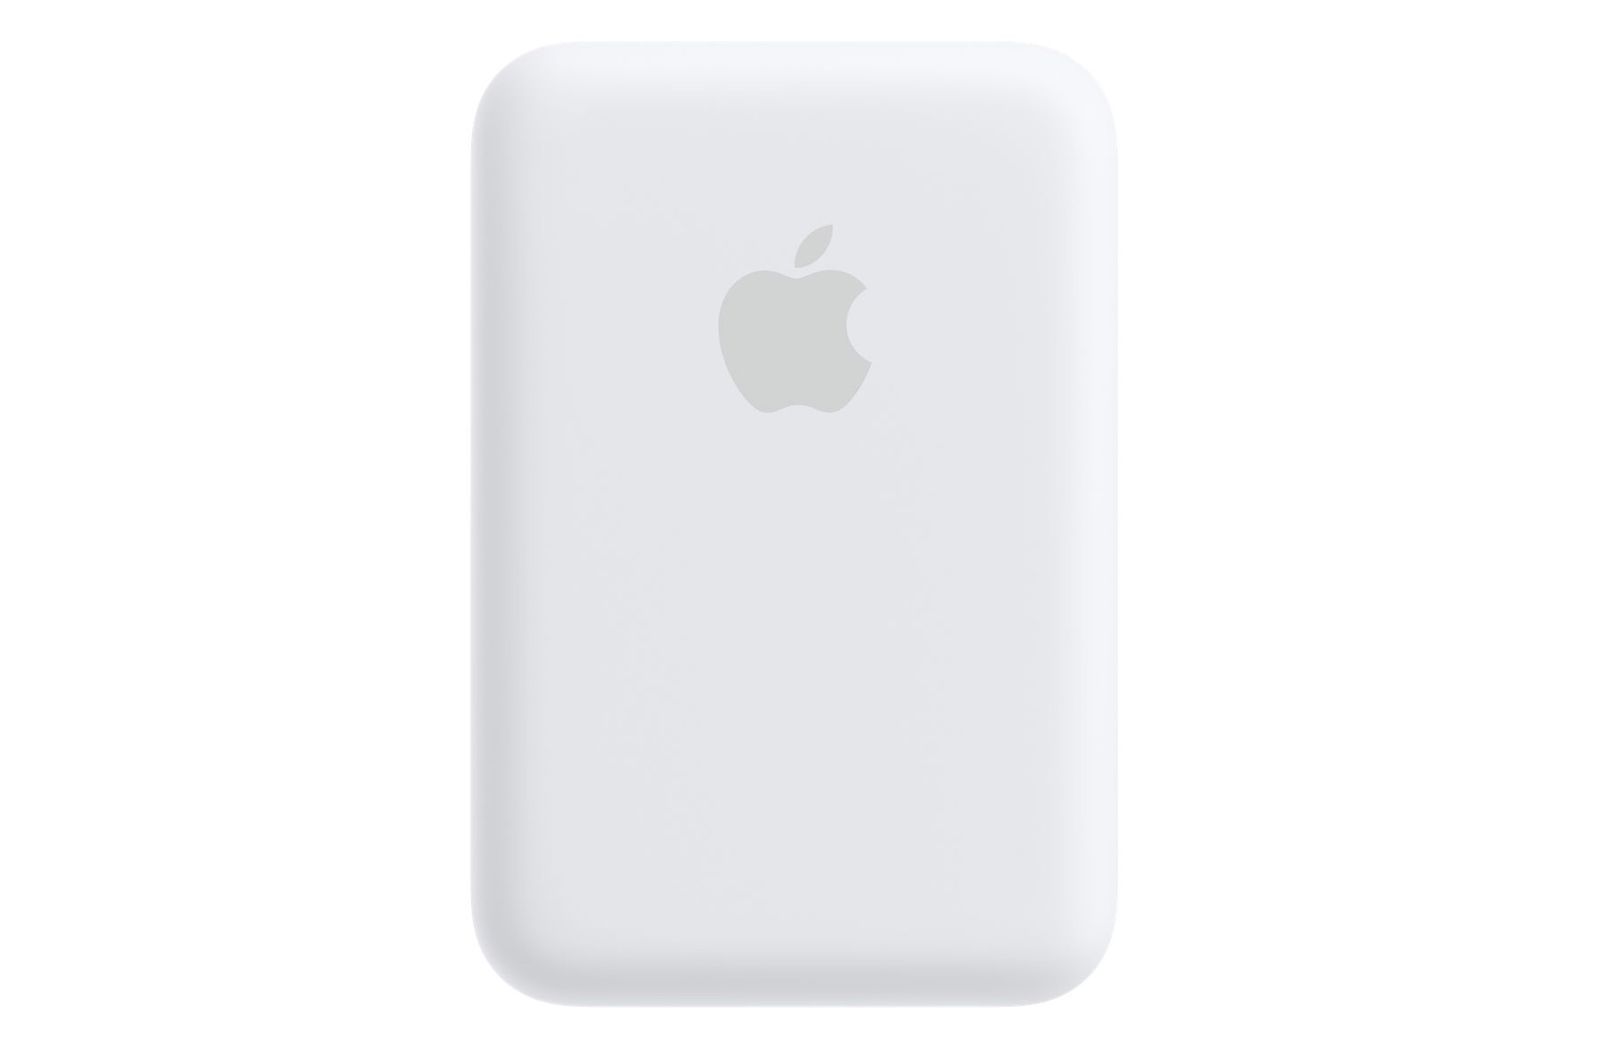 update apple magsafe battery pack